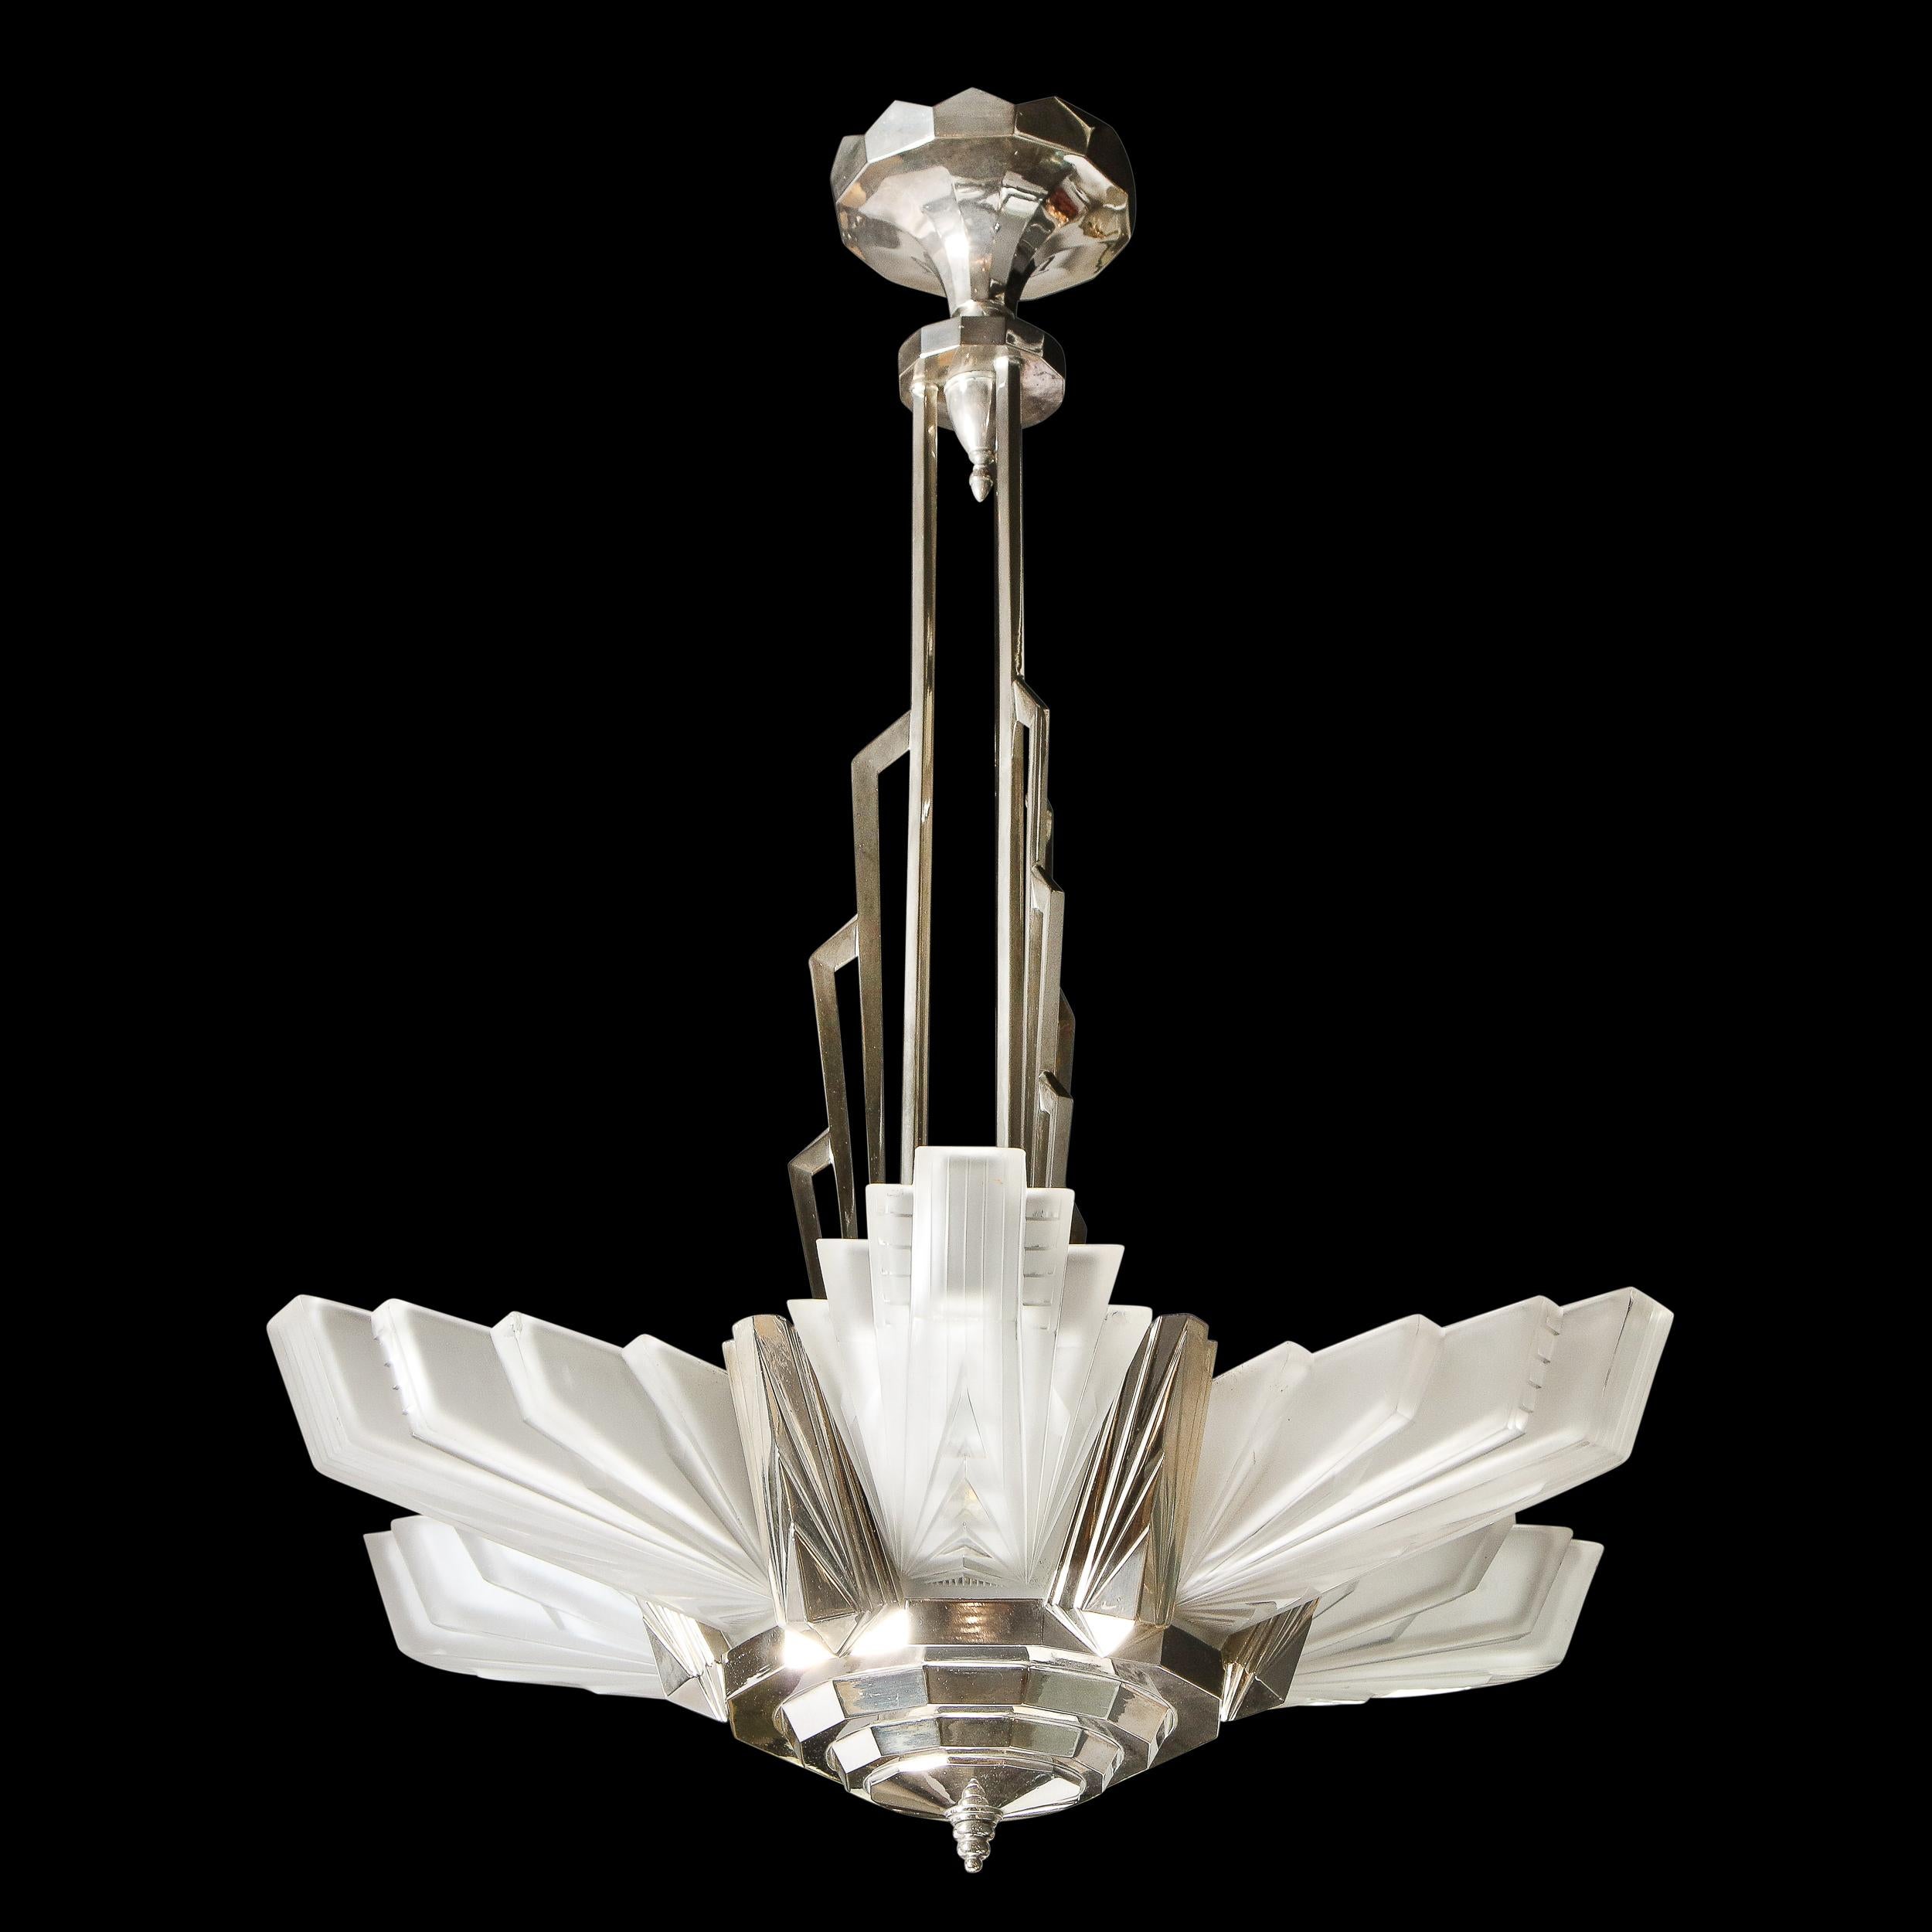 A stunning and rare example of a fine French Art Deco chandelier by Atelier Petitot. This piece exemplifies the height of the Skyscraper influence on Art Deco in France. It features six glass shades in a highly stylized Cubist design each signed